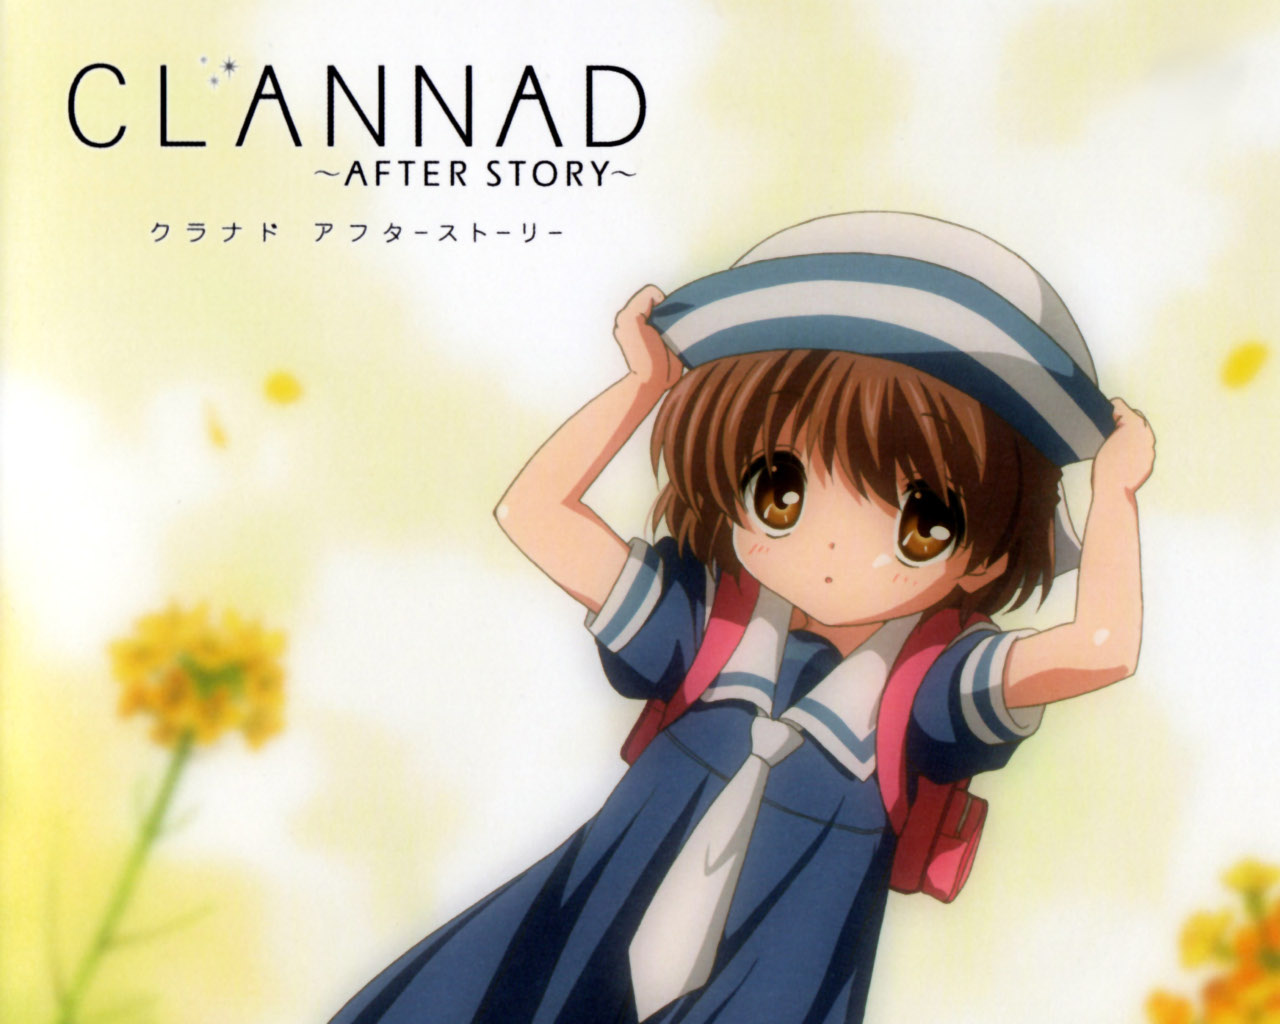 Some Devastatingly Cute Ushio Chan Pictures From Clannad After Story At Least I Think So Astronerdboy S Anime Manga Blog Astronerdboy S Anime Manga Blog